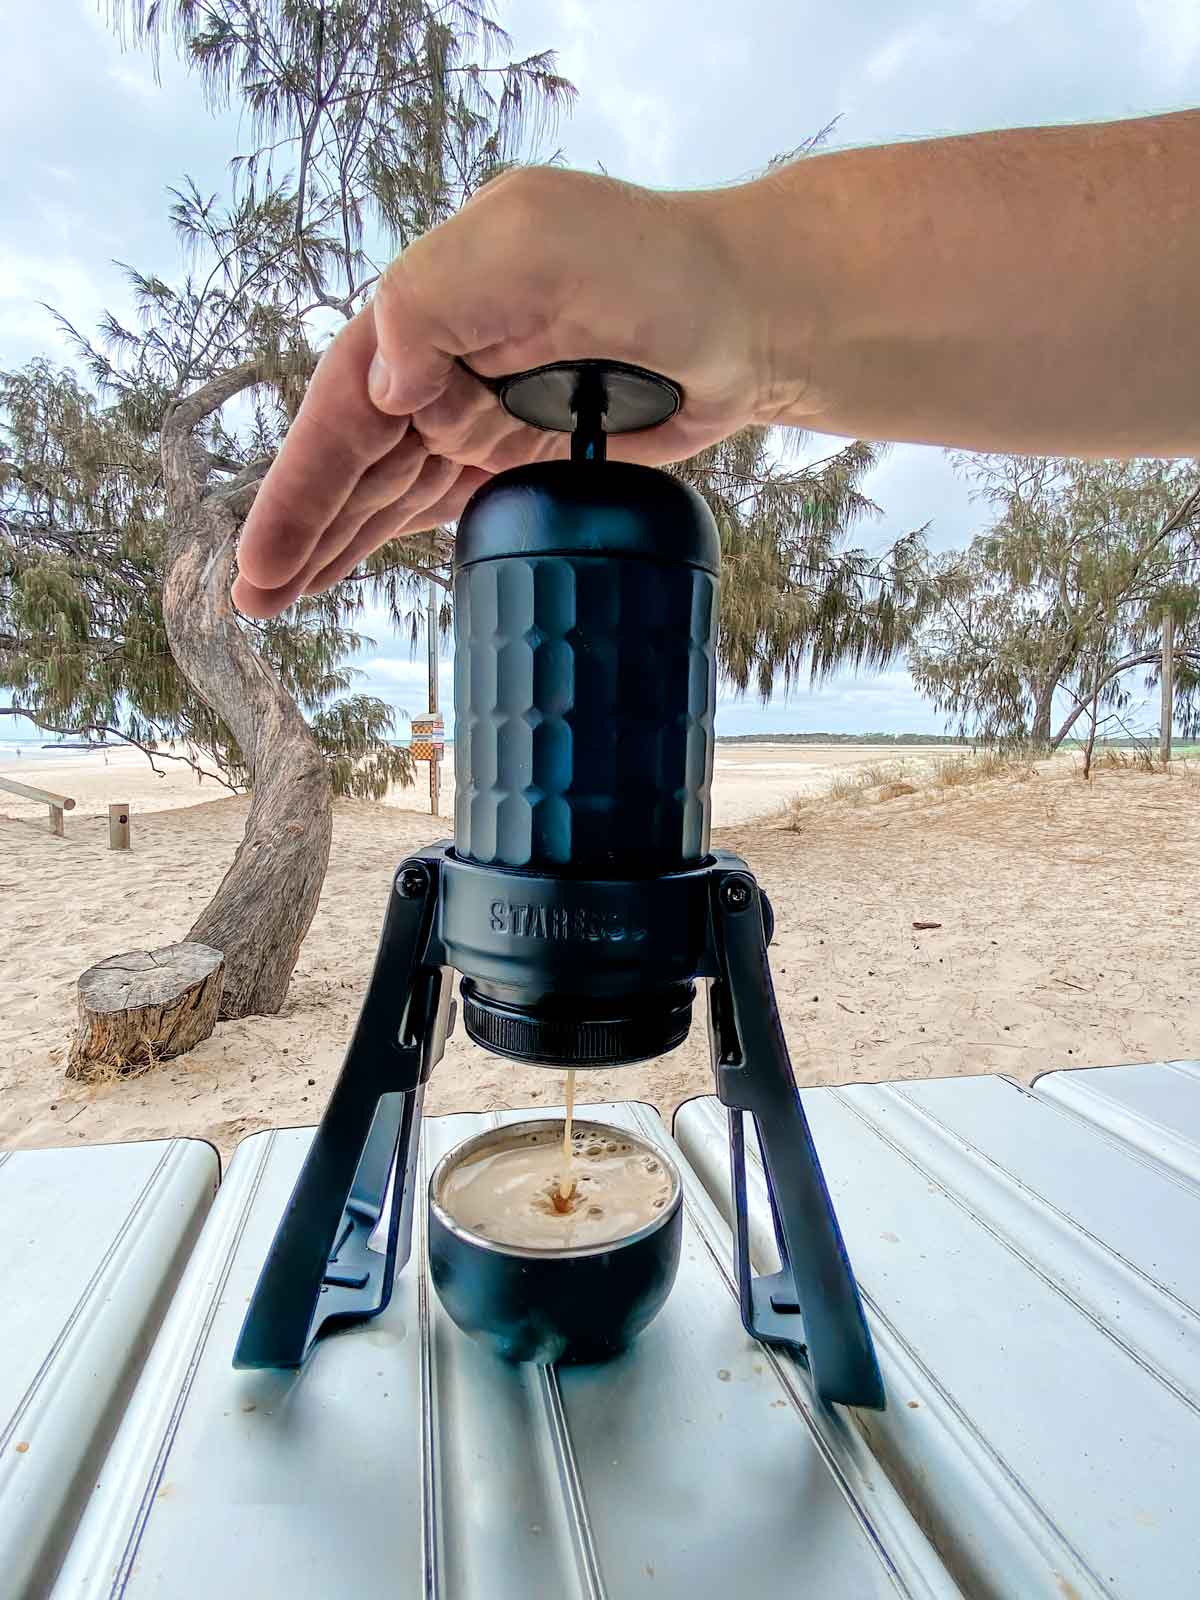 Extracting esspresso with Staresso machine at the beach